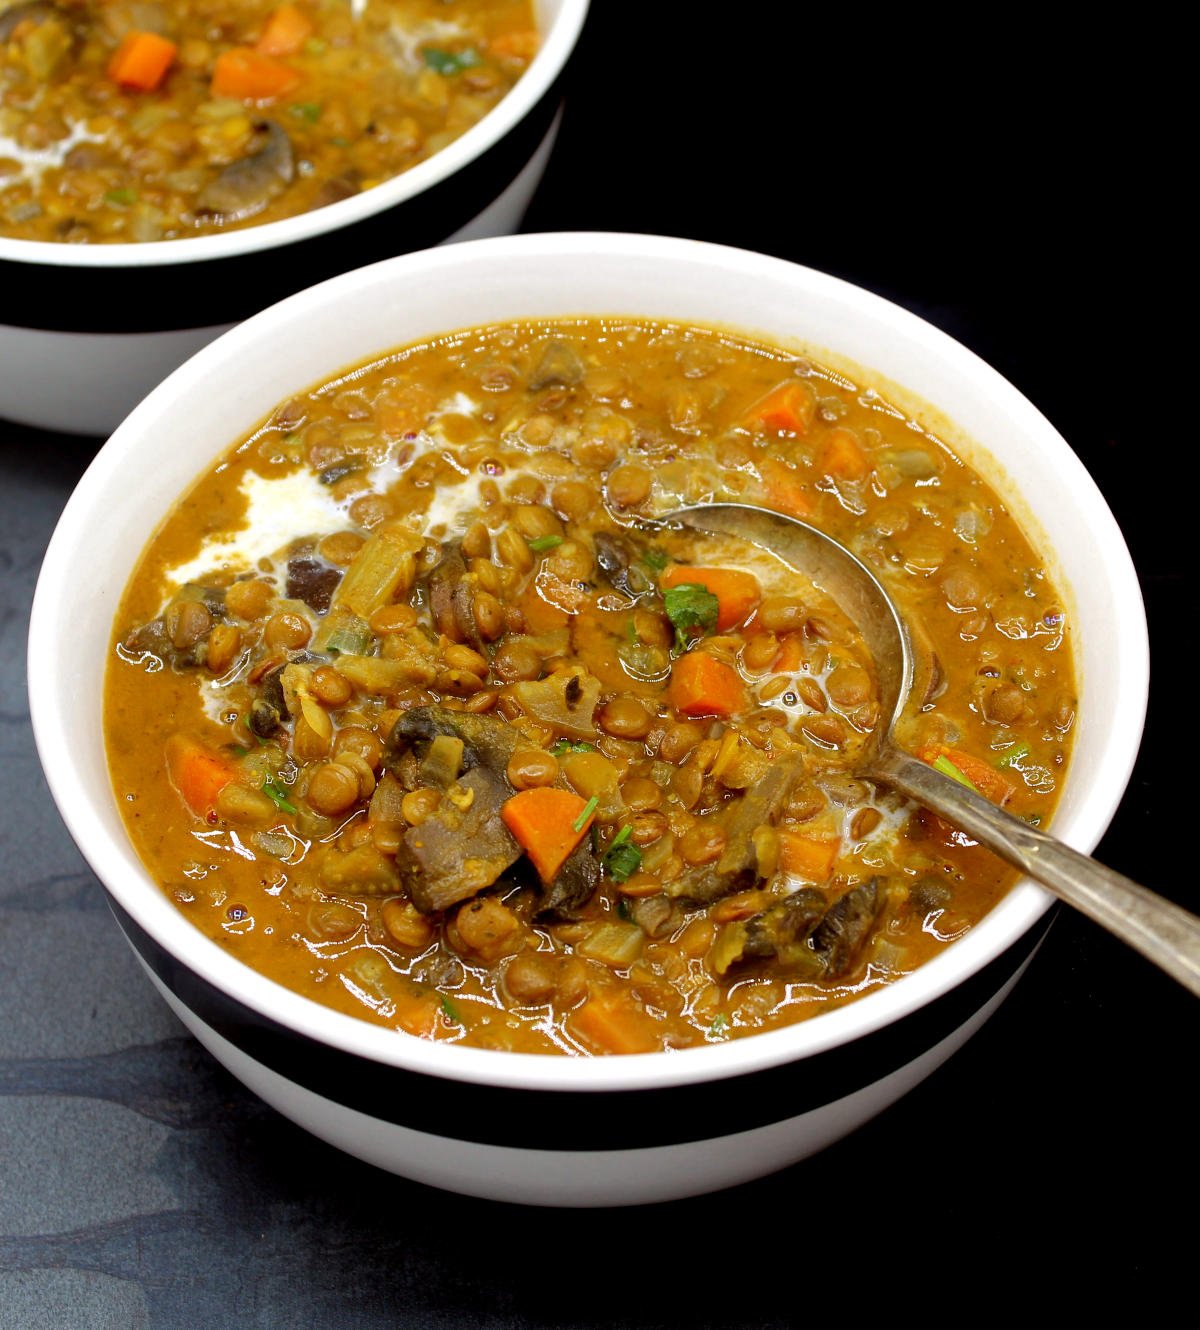 Creamy lentil soup with carrots, mushrooms, celery, onions, cilantro and brown lentils.